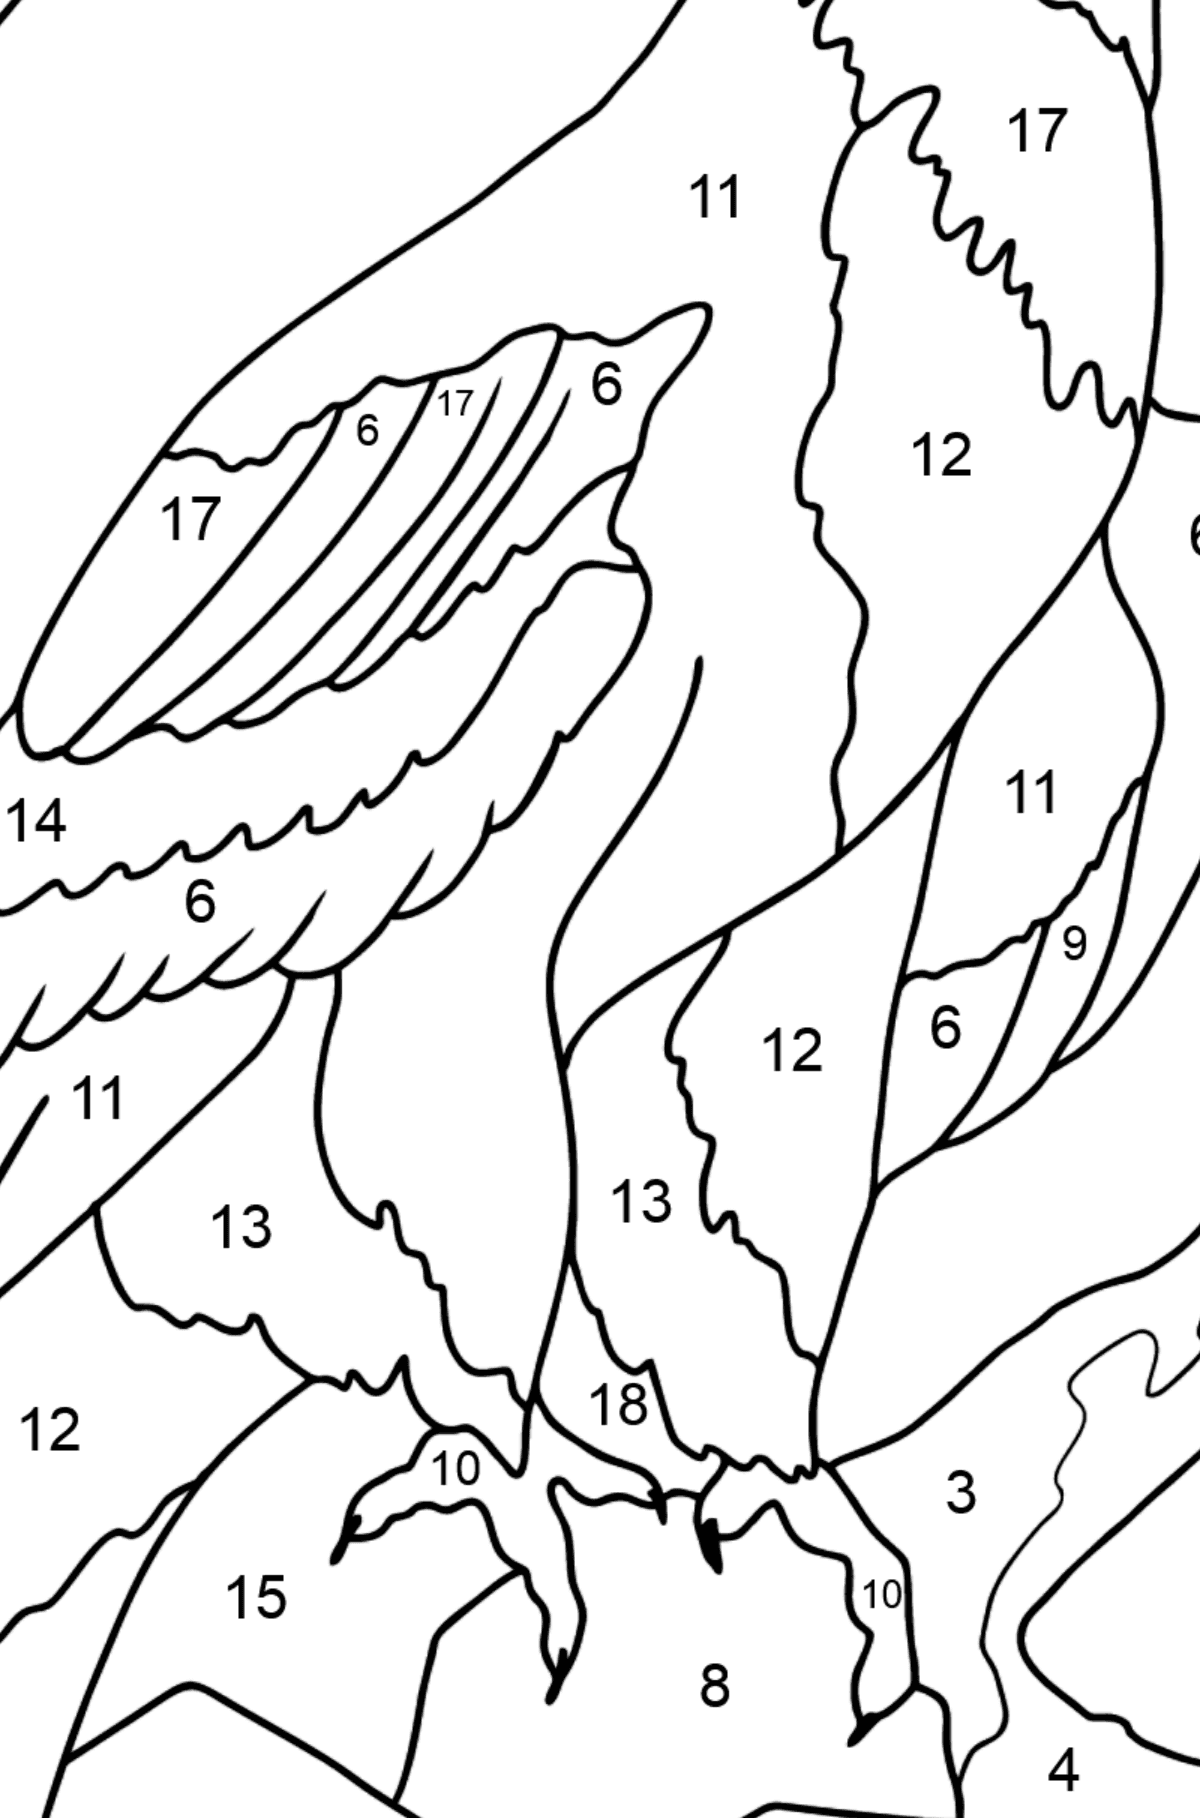 Coloring Page - An Eagle is Looking for Prey - Coloring by Numbers for Kids